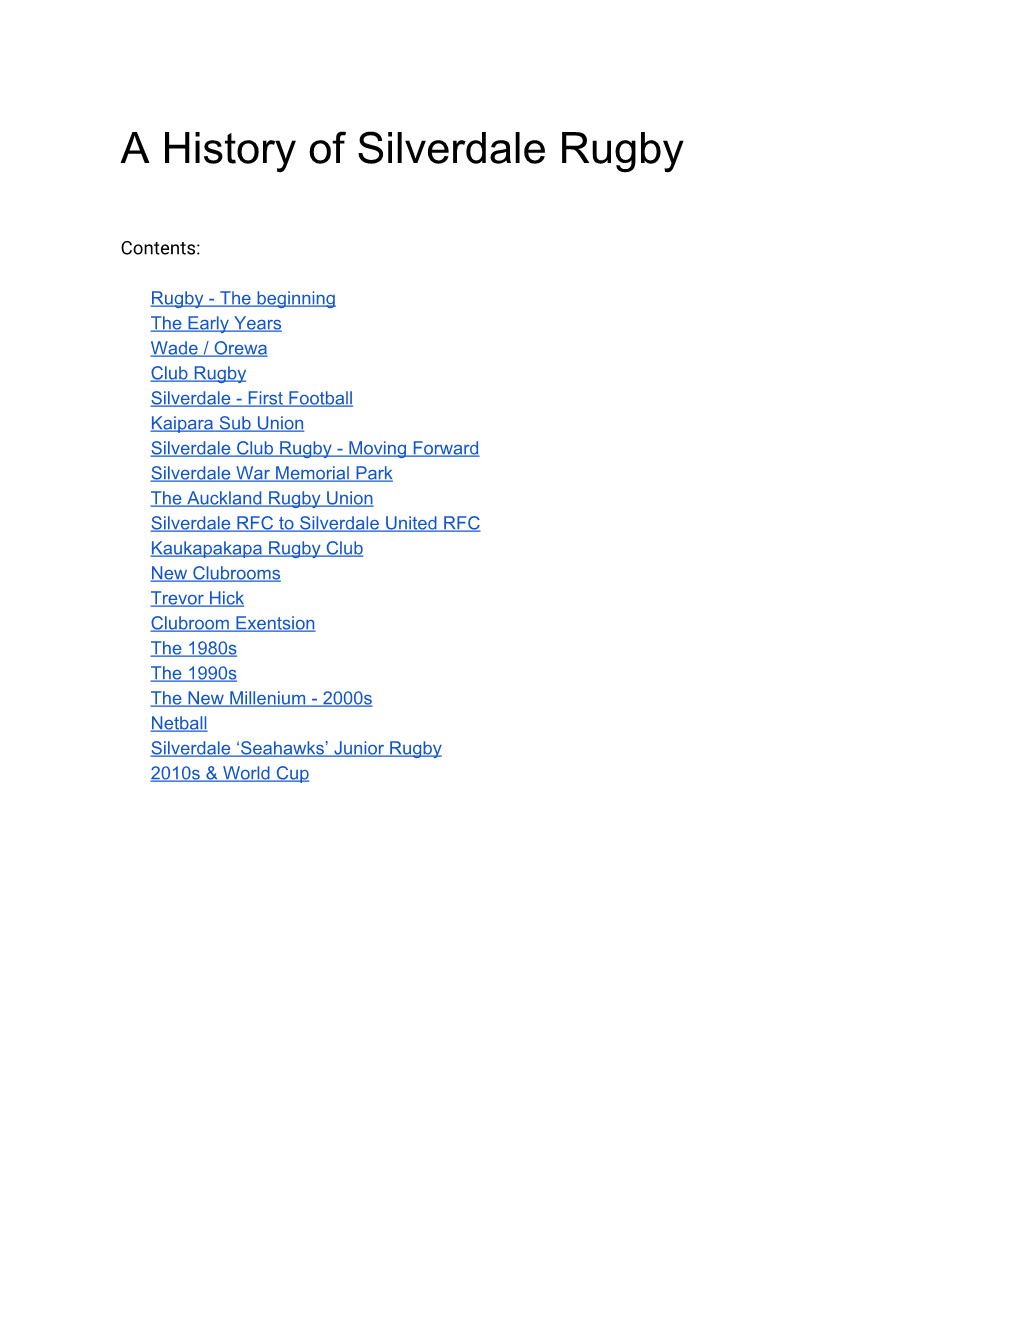 A History of Silverdale Rugby